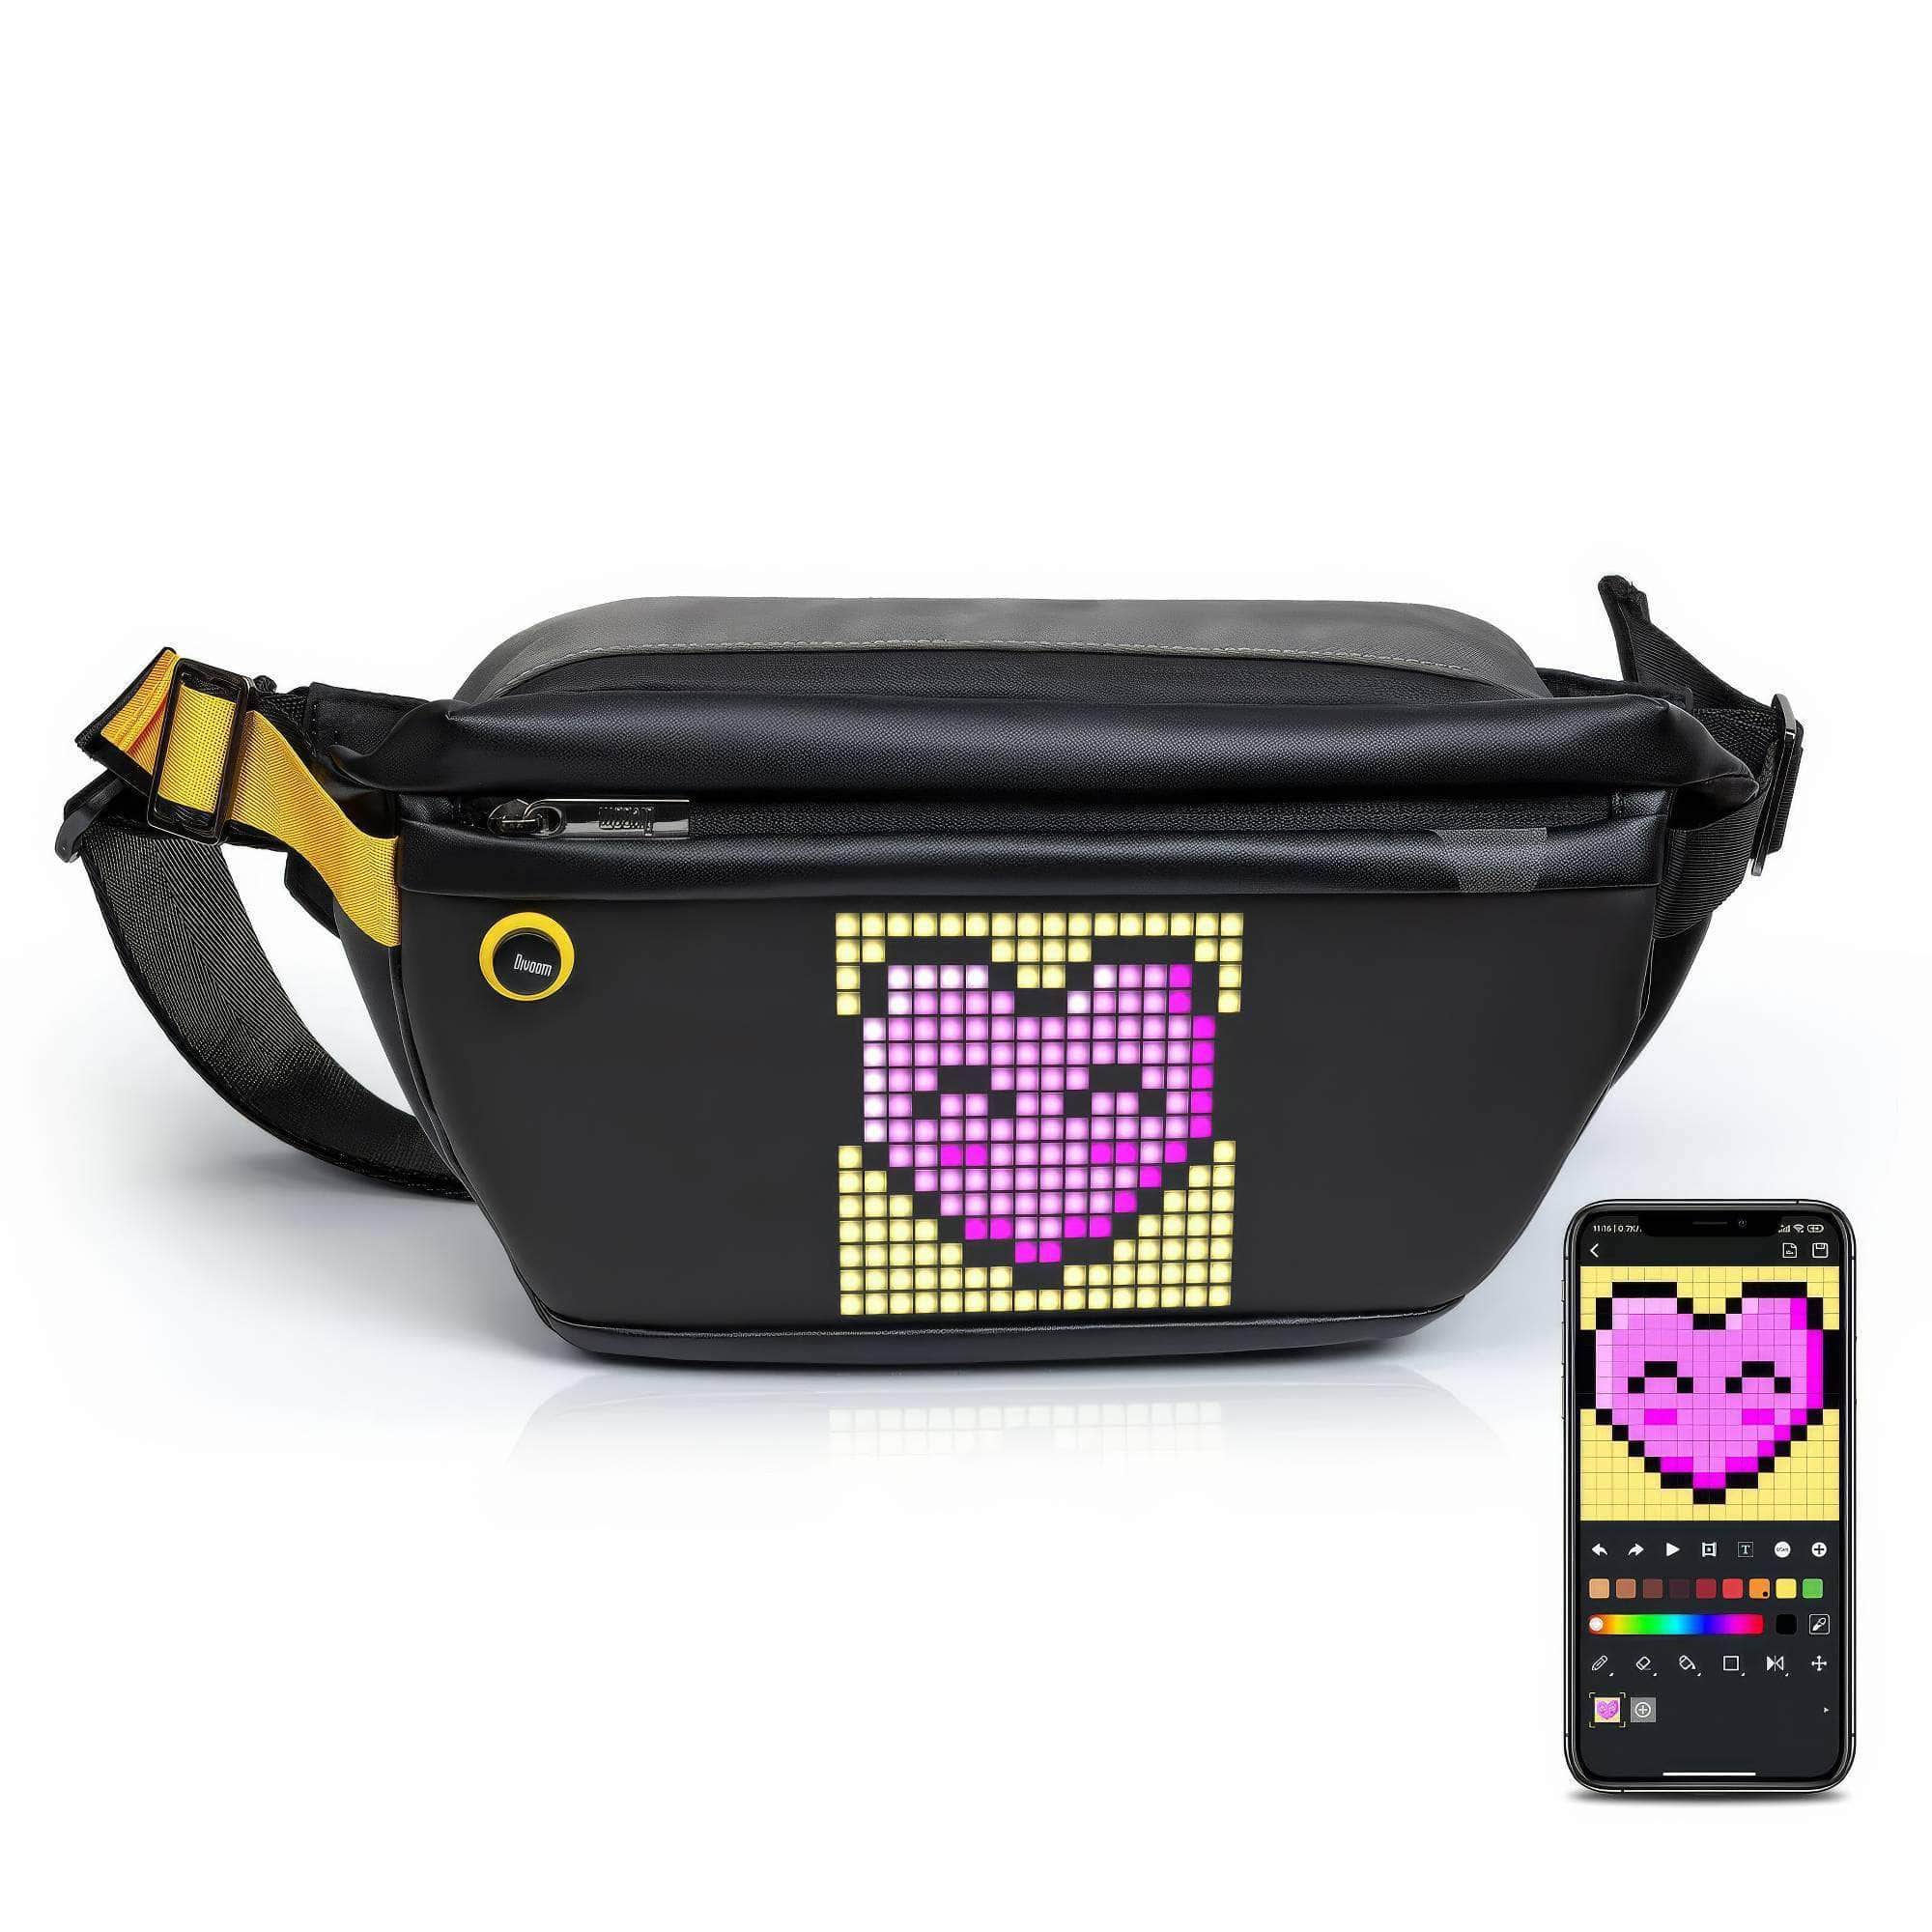 Divoom Pixel Art Sling Bag - Customizable Fashion Design, Outdoor Sport Waterproof, Ideal for Biking, Hiking, and Outdoor Activities with Spacious Interior Black